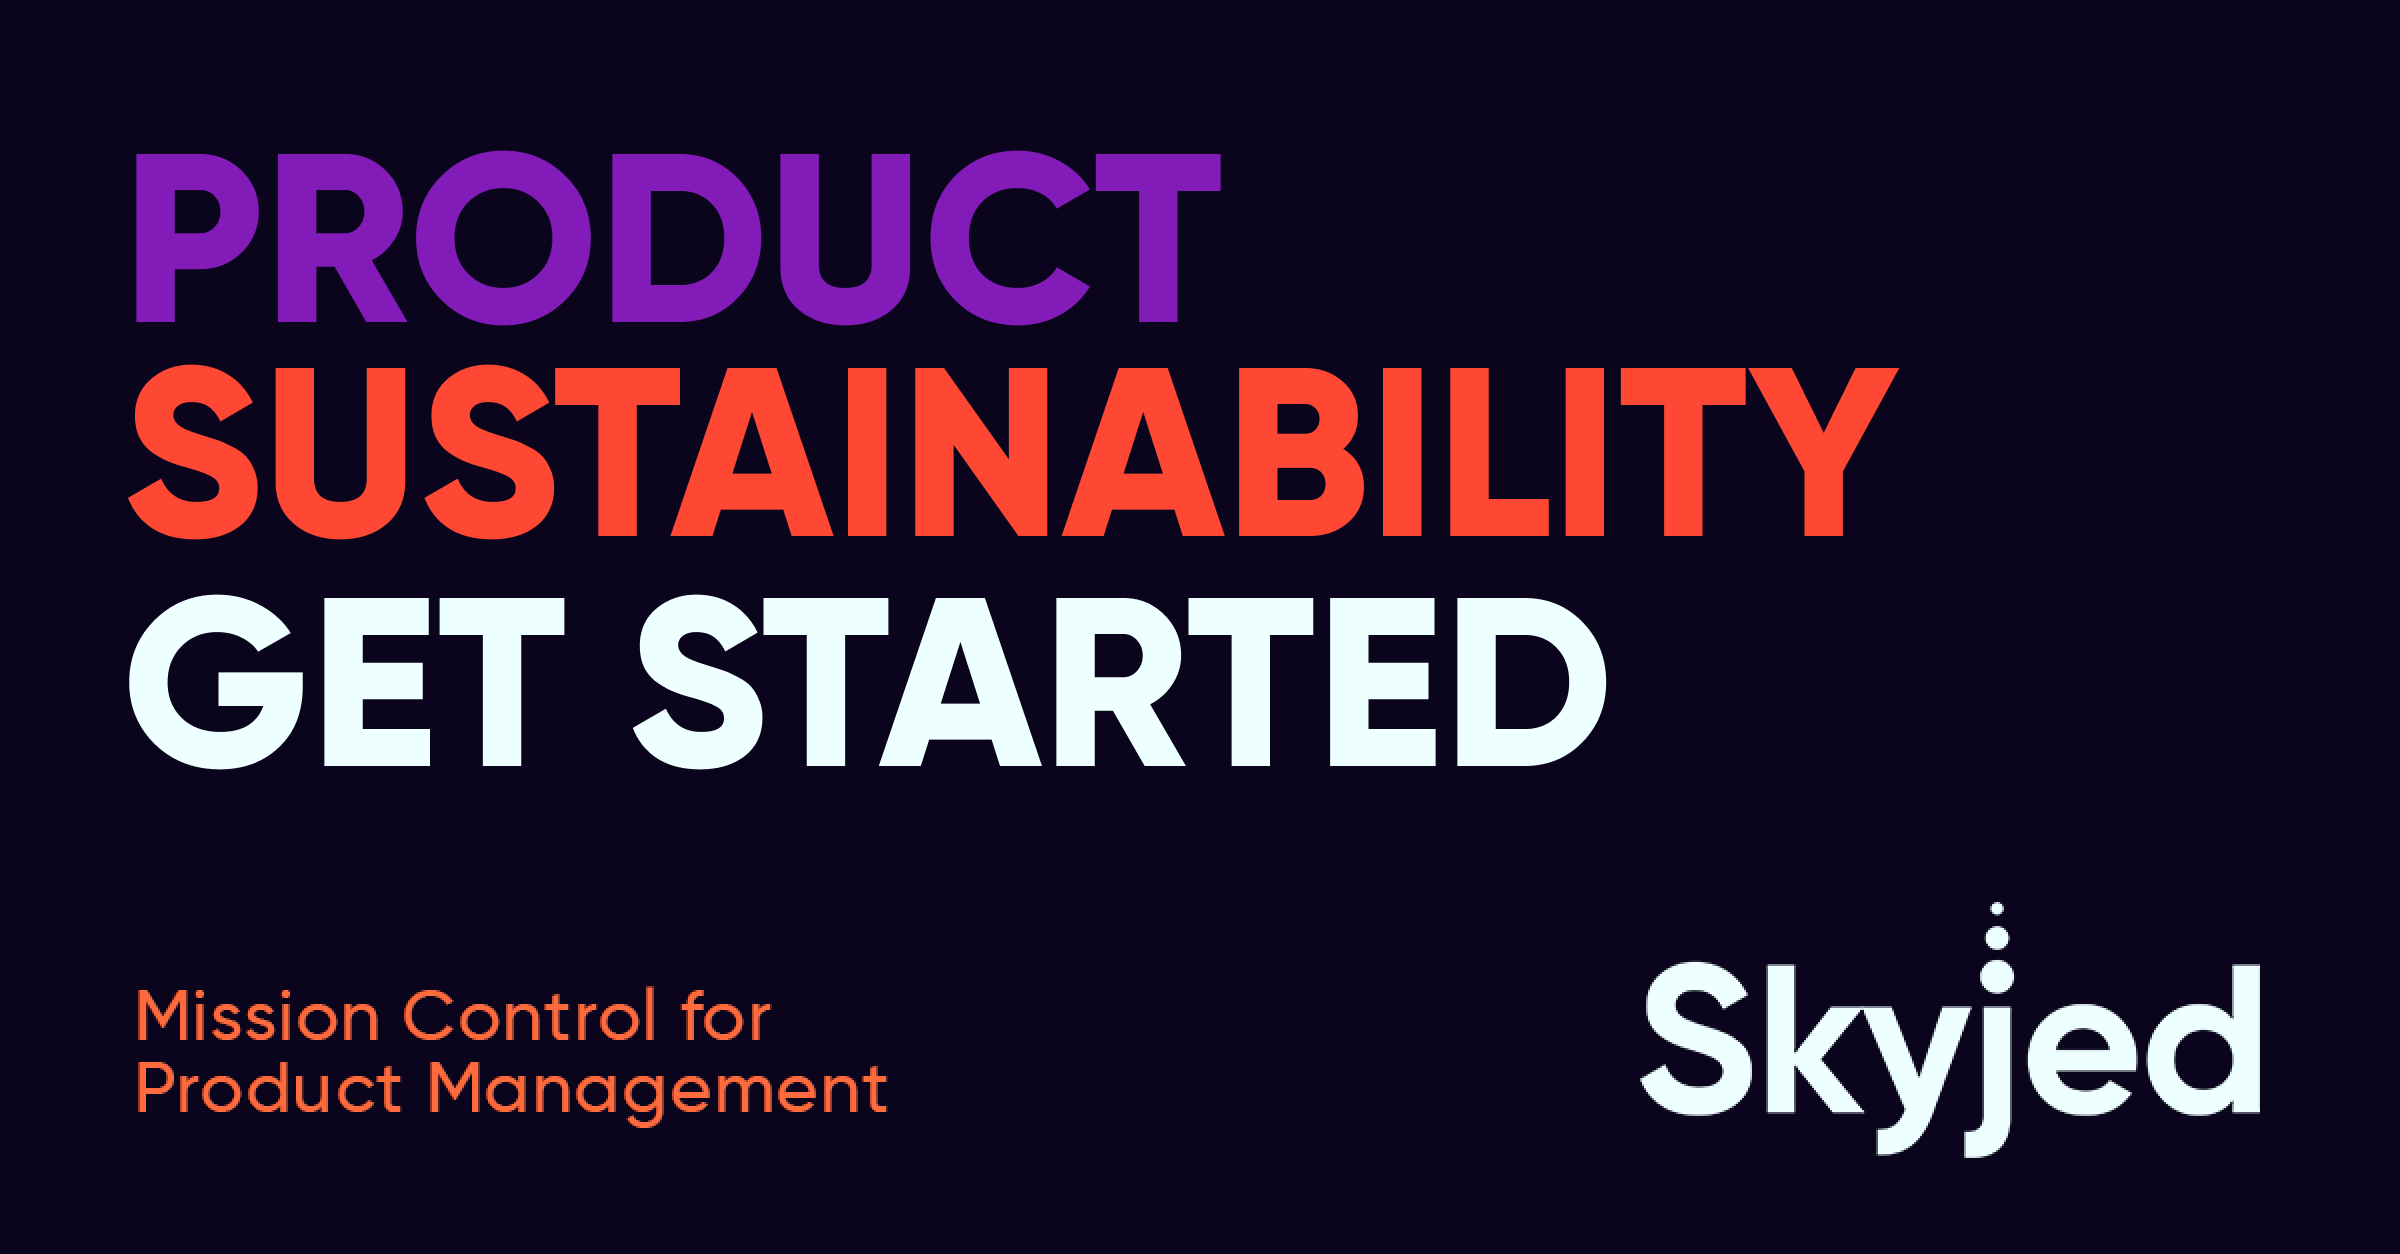 Discover Skyjed's Best Practice to Product Sustainability